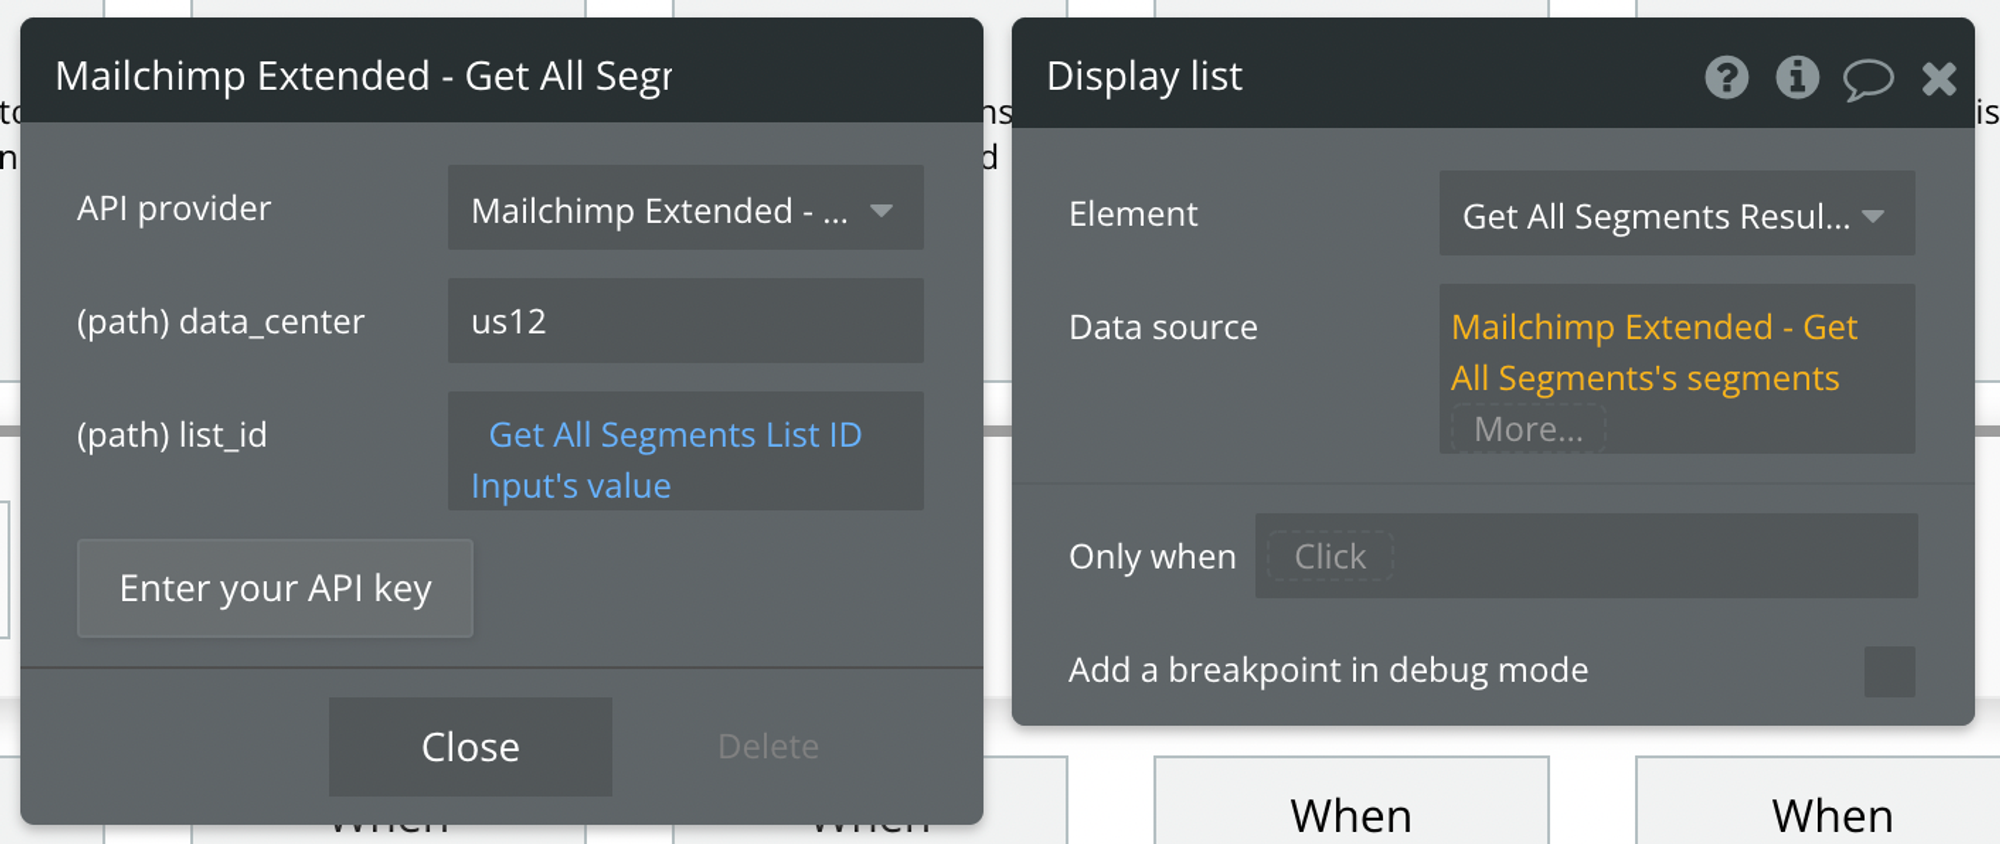 Select Mailchimp Extended - Get All Segments's segments for the data source